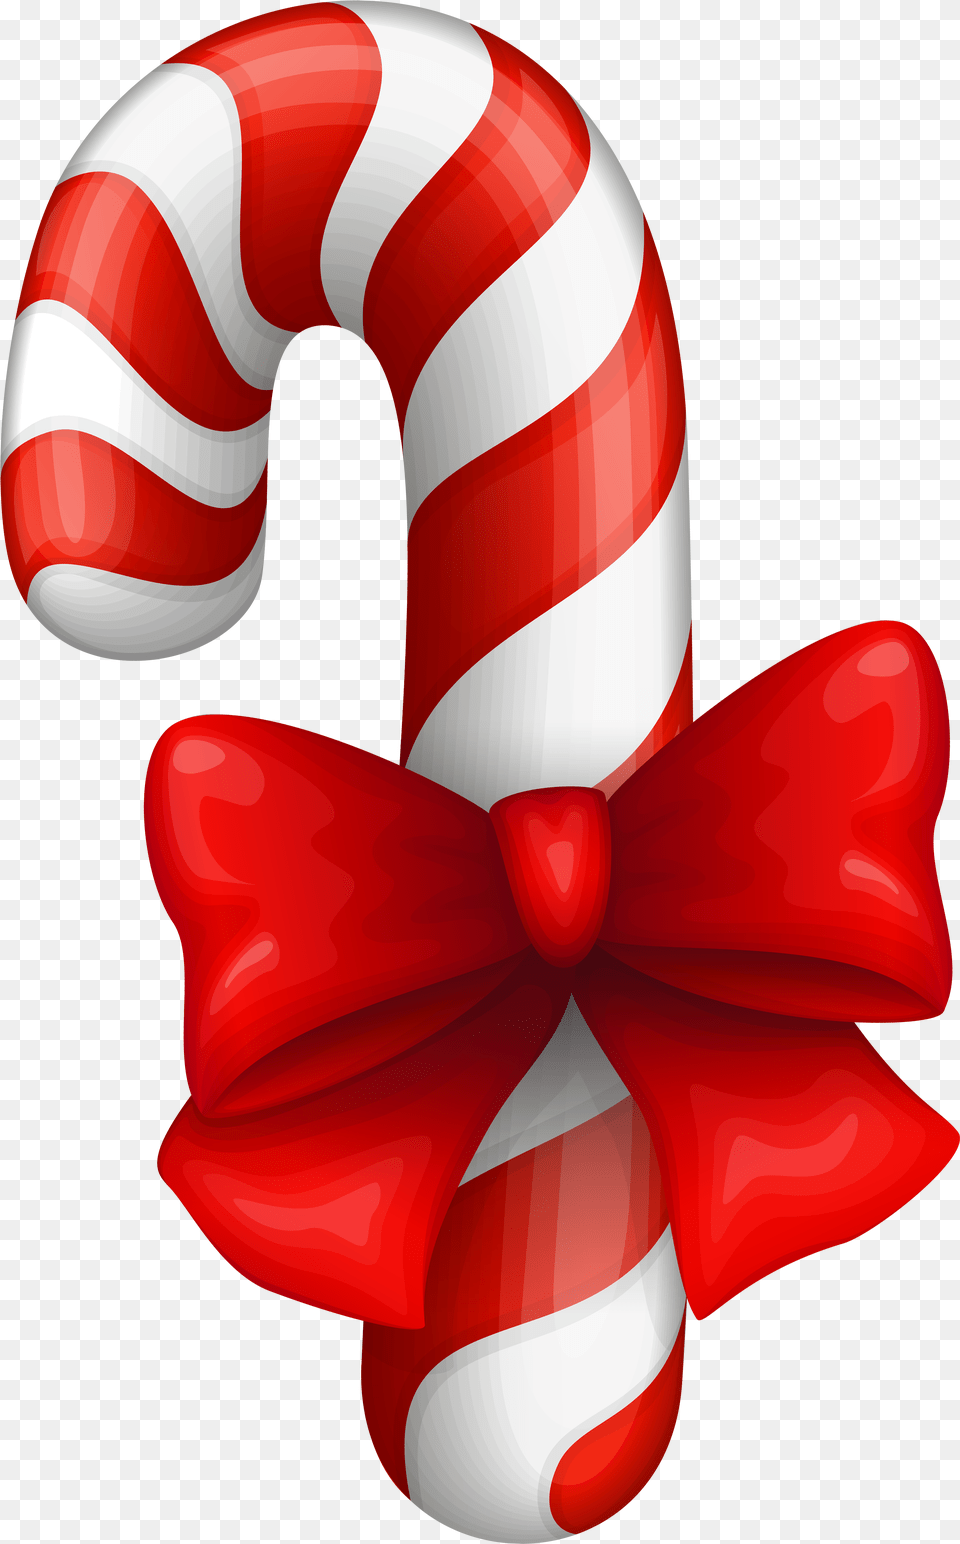 Cane Clip Art Candy Cane Clip Art, Food, Sweets Png Image